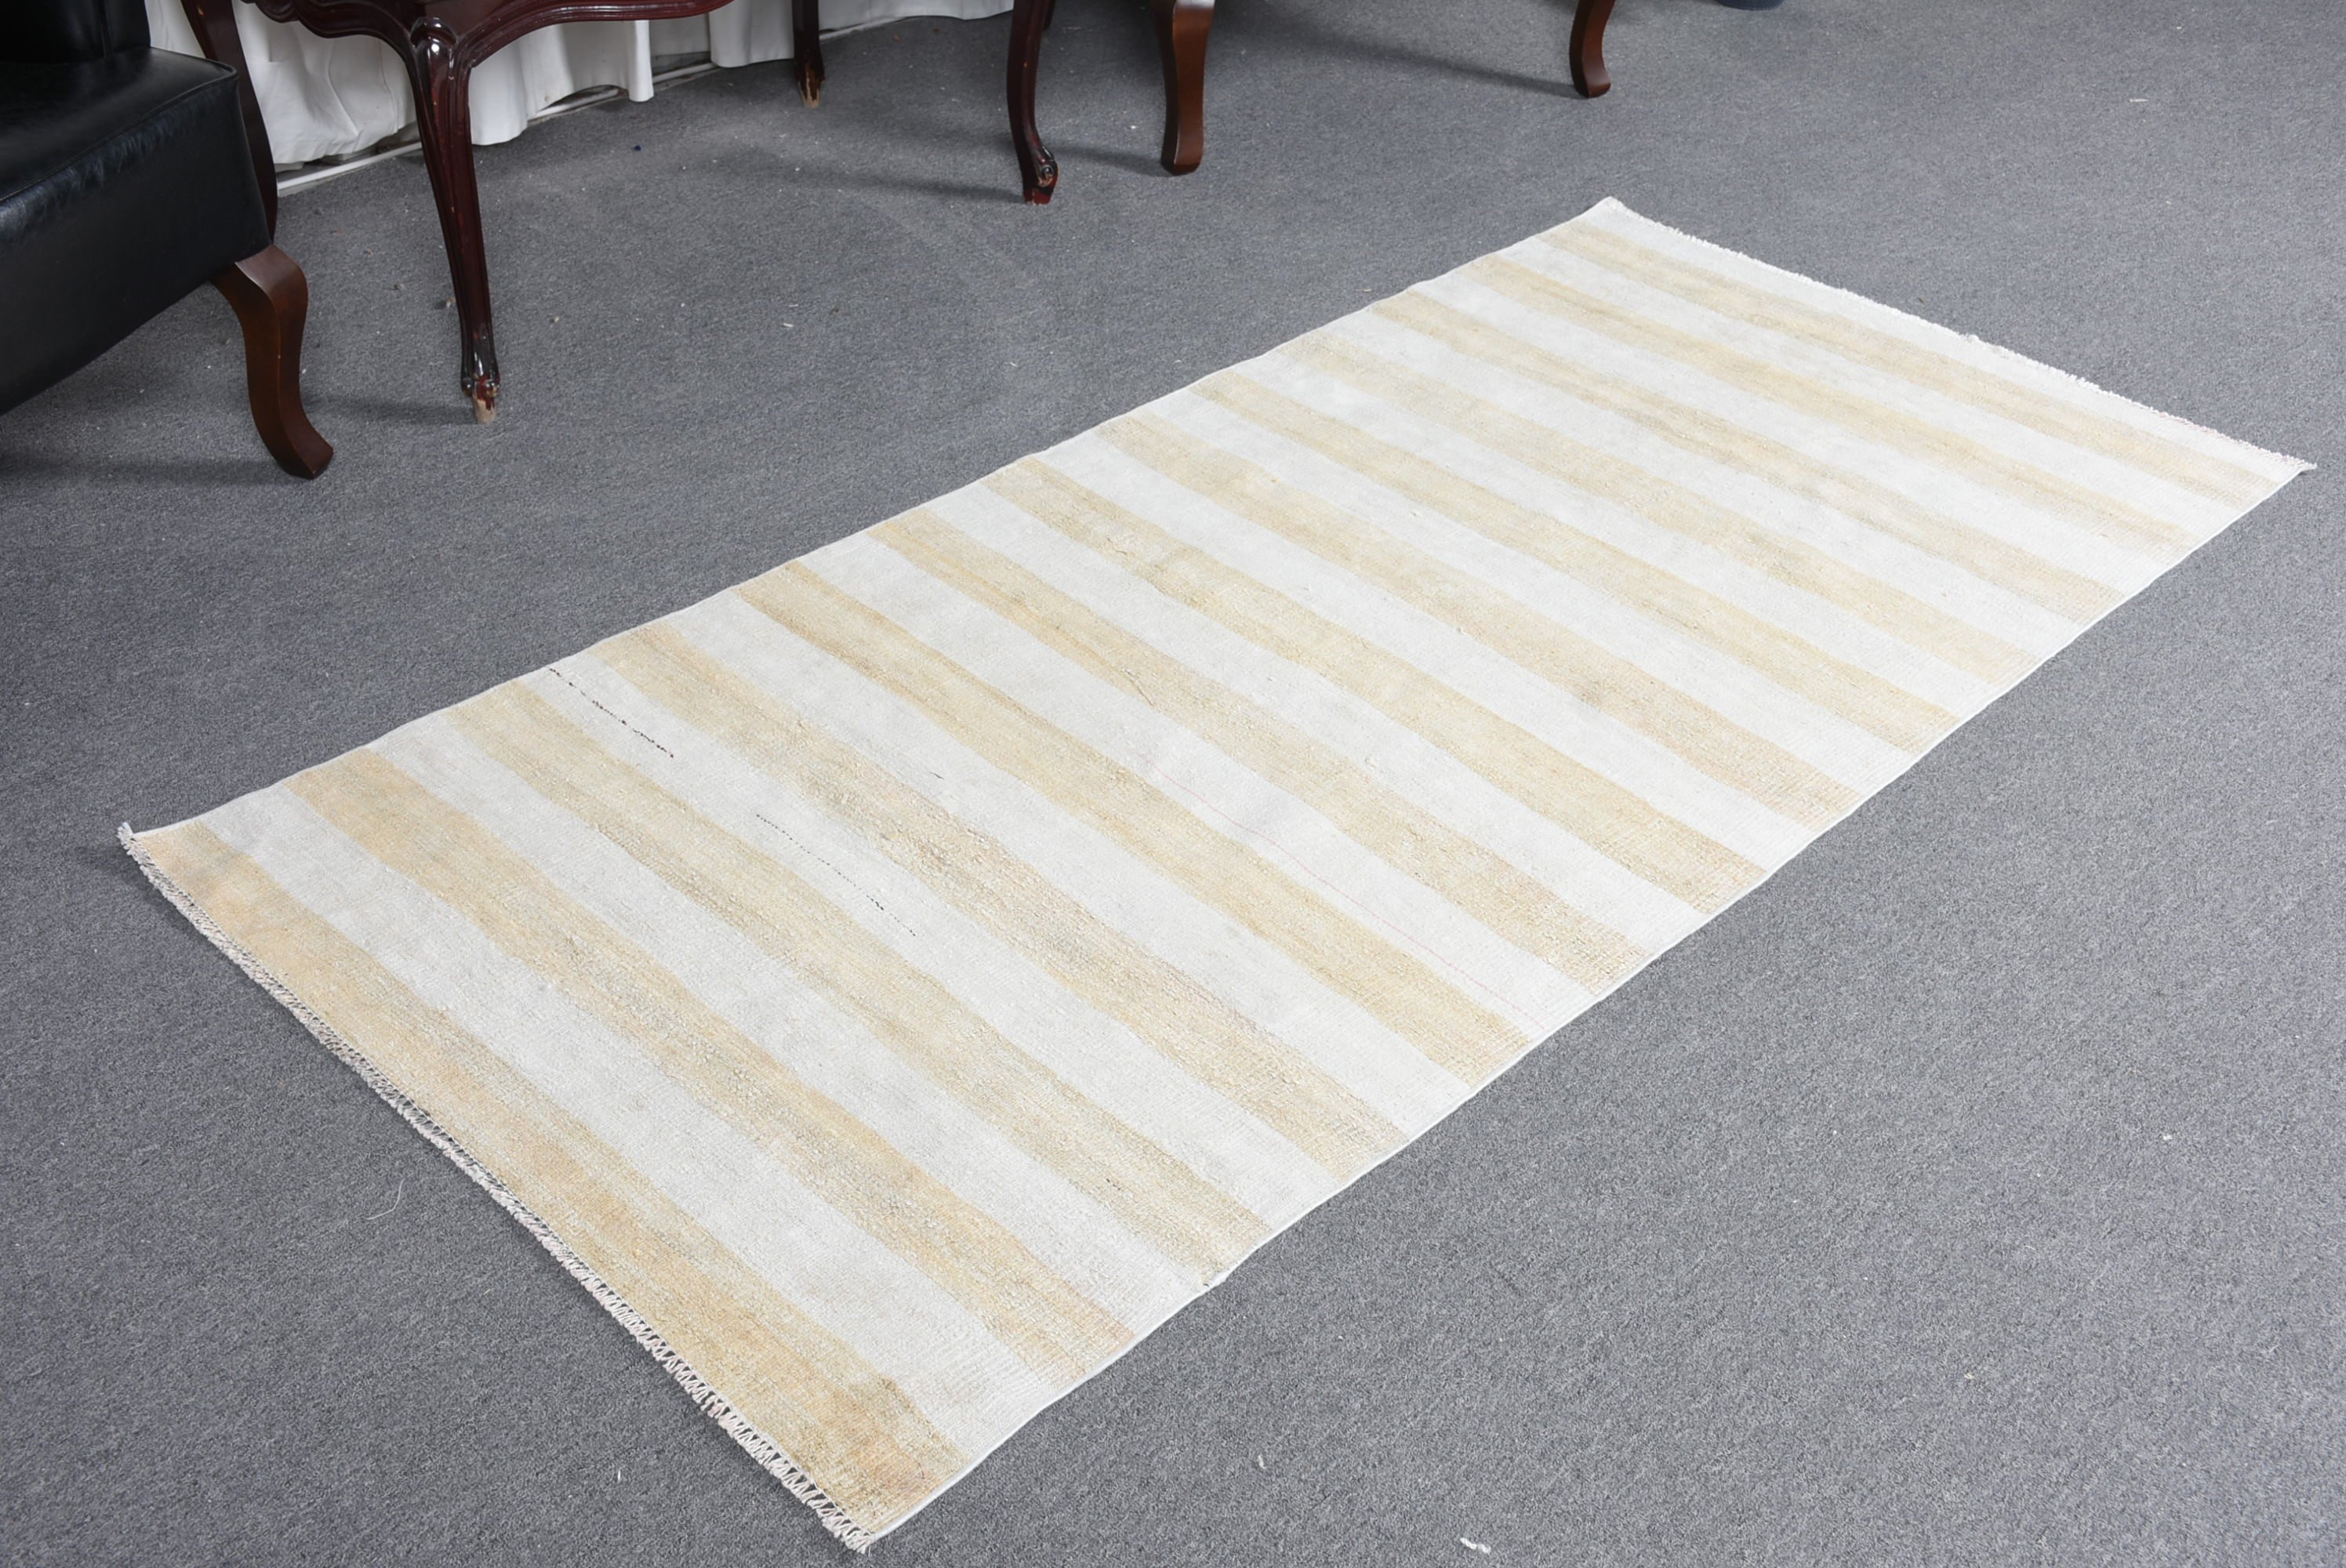 Turkish Rug, Kitchen Rug, Oushak Rugs, Rugs for Kitchen, Vintage Rugs, 3x6.5 ft Accent Rug, White Cool Rug, Nursery Rug